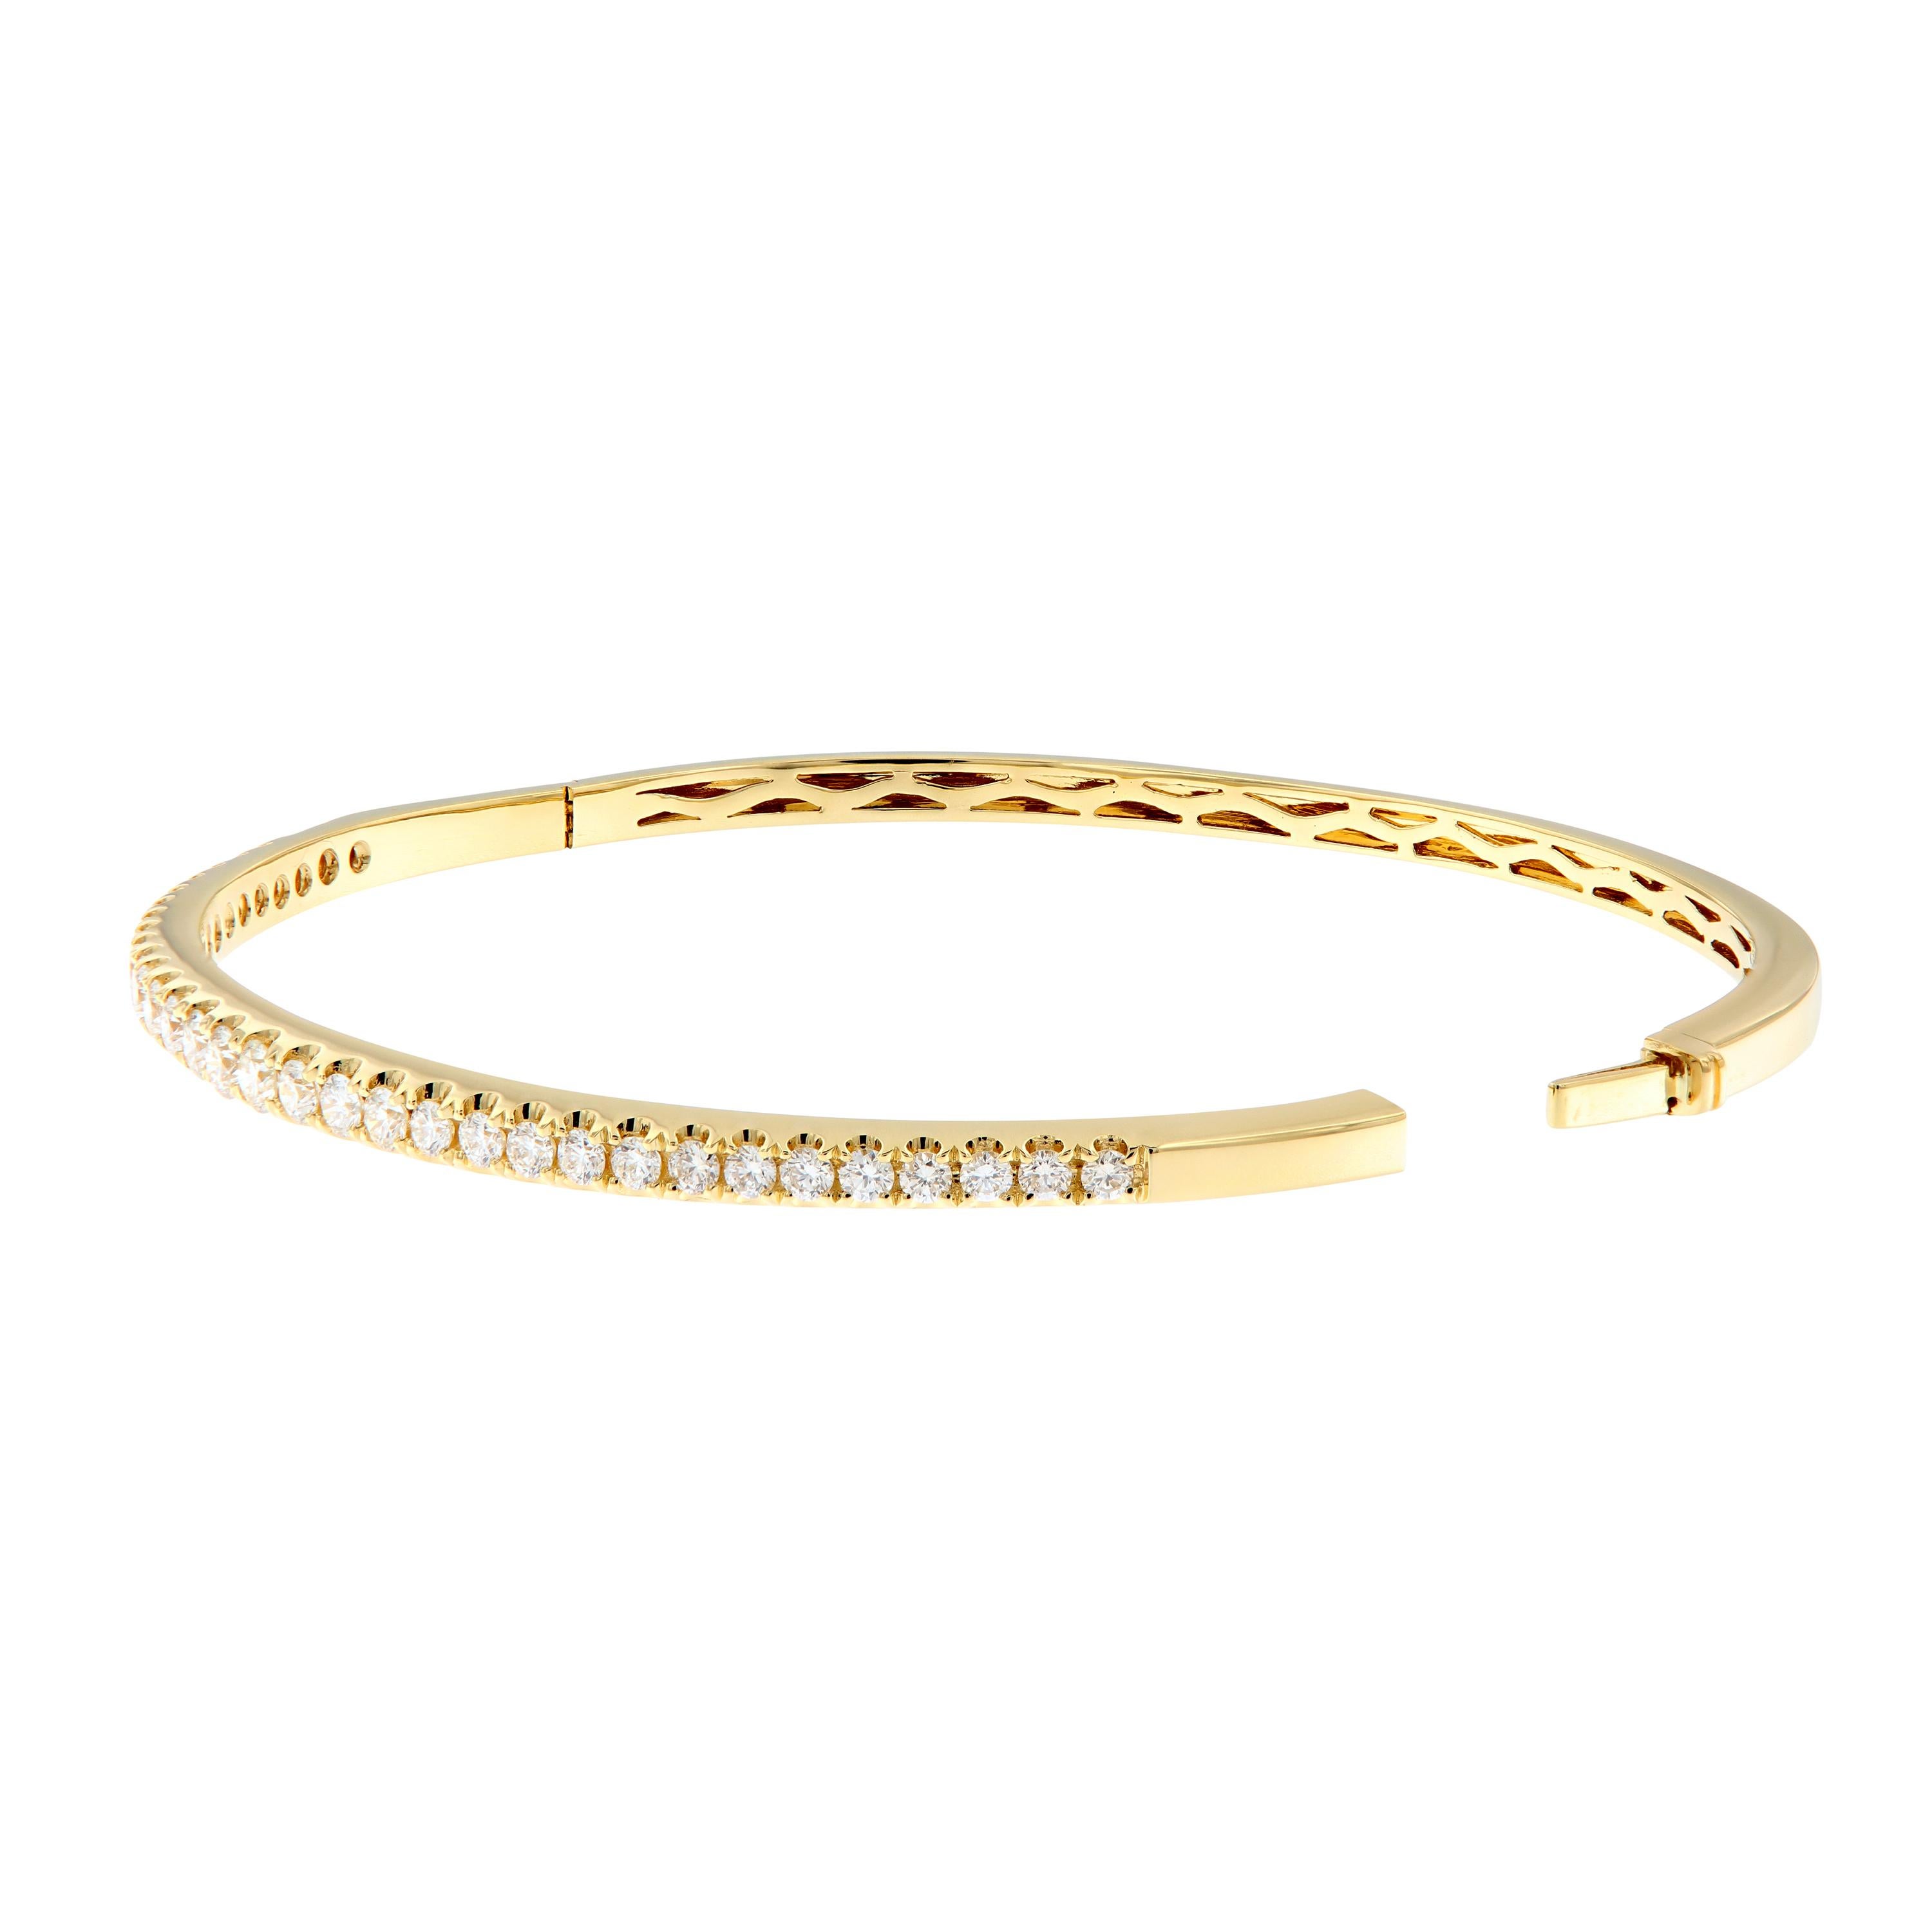 A classic bracelet beautifully crafted in 18k yellow gold features 34 sparkling diamonds. Striking on its own or stack two or more to create a bolder look. This bracelet fits PERFECTLY with a 17 Cartier Love Bracelet! Inner diameter is 2.25